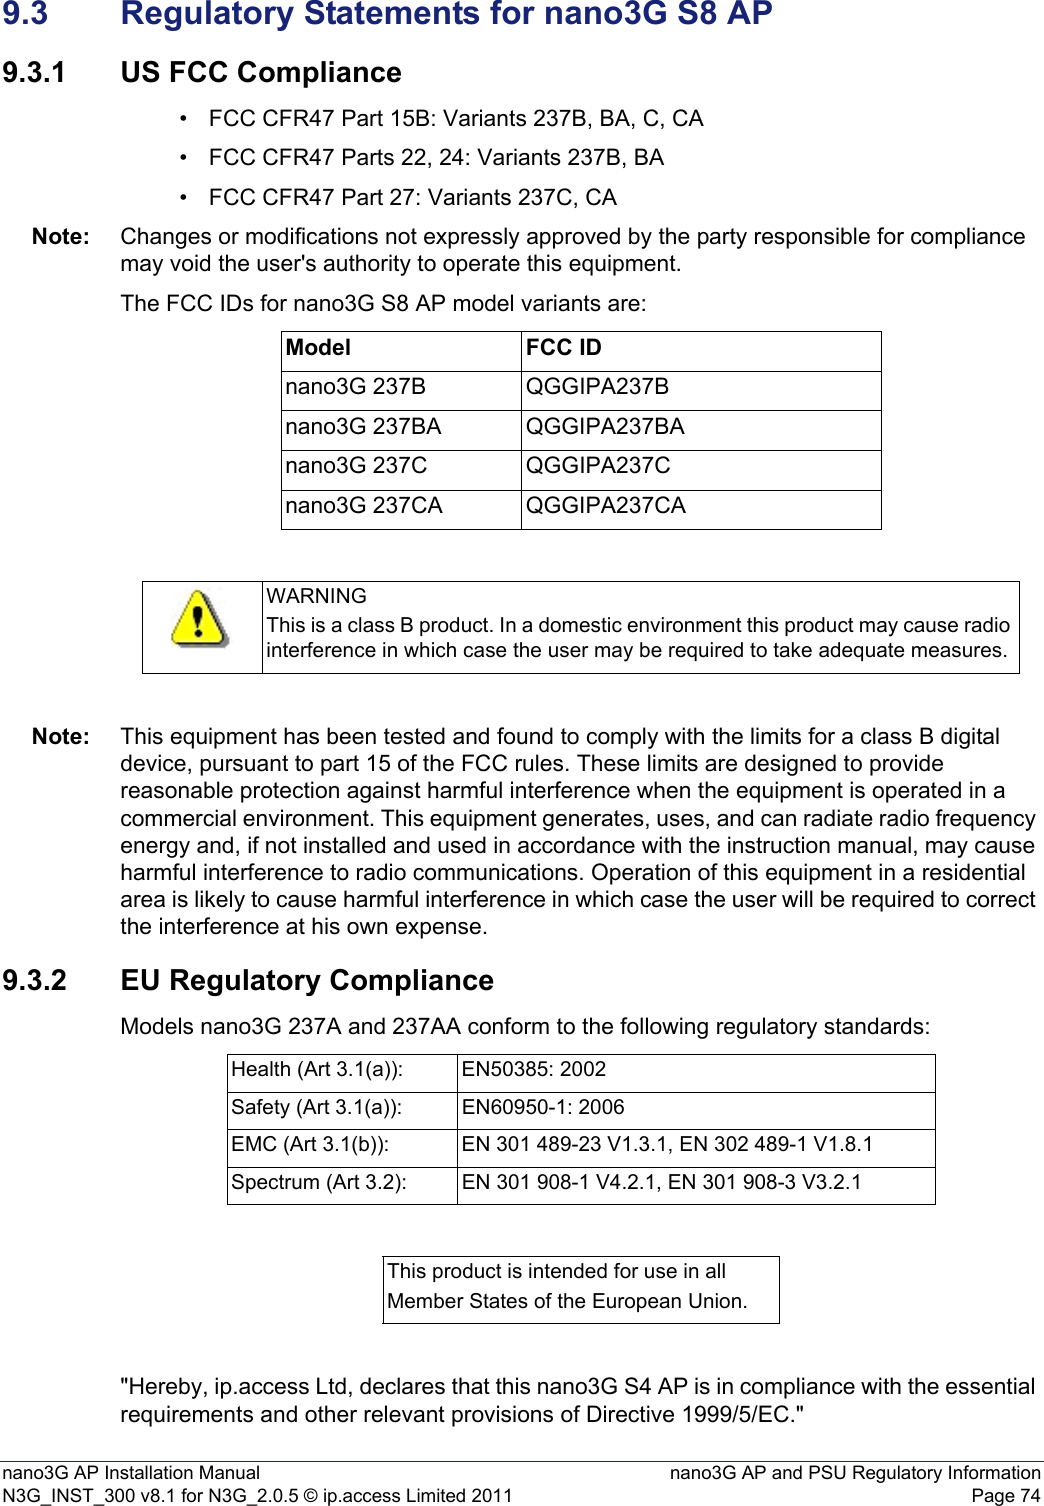 nano3G AP Installation Manual nano3G AP and PSU Regulatory InformationN3G_INST_300 v8.1 for N3G_2.0.5 © ip.access Limited 2011 Page 749.3 Regulatory Statements for nano3G S8 AP9.3.1 US FCC Compliance• FCC CFR47 Part 15B: Variants 237B, BA, C, CA• FCC CFR47 Parts 22, 24: Variants 237B, BA• FCC CFR47 Part 27: Variants 237C, CANote: Changes or modifications not expressly approved by the party responsible for compliance may void the user&apos;s authority to operate this equipment.The FCC IDs for nano3G S8 AP model variants are:Note: This equipment has been tested and found to comply with the limits for a class B digital device, pursuant to part 15 of the FCC rules. These limits are designed to provide reasonable protection against harmful interference when the equipment is operated in a commercial environment. This equipment generates, uses, and can radiate radio frequency energy and, if not installed and used in accordance with the instruction manual, may cause harmful interference to radio communications. Operation of this equipment in a residential area is likely to cause harmful interference in which case the user will be required to correct the interference at his own expense.9.3.2 EU Regulatory ComplianceModels nano3G 237A and 237AA conform to the following regulatory standards:&quot;Hereby, ip.access Ltd, declares that this nano3G S4 AP is in compliance with the essential requirements and other relevant provisions of Directive 1999/5/EC.&quot;Model FCC IDnano3G 237B QGGIPA237Bnano3G 237BA QGGIPA237BAnano3G 237C QGGIPA237Cnano3G 237CA QGGIPA237CAWARNINGThis is a class B product. In a domestic environment this product may cause radio interference in which case the user may be required to take adequate measures.Health (Art 3.1(a)): EN50385: 2002Safety (Art 3.1(a)): EN60950-1: 2006EMC (Art 3.1(b)): EN 301 489-23 V1.3.1, EN 302 489-1 V1.8.1Spectrum (Art 3.2): EN 301 908-1 V4.2.1, EN 301 908-3 V3.2.1This product is intended for use in allMember States of the European Union.